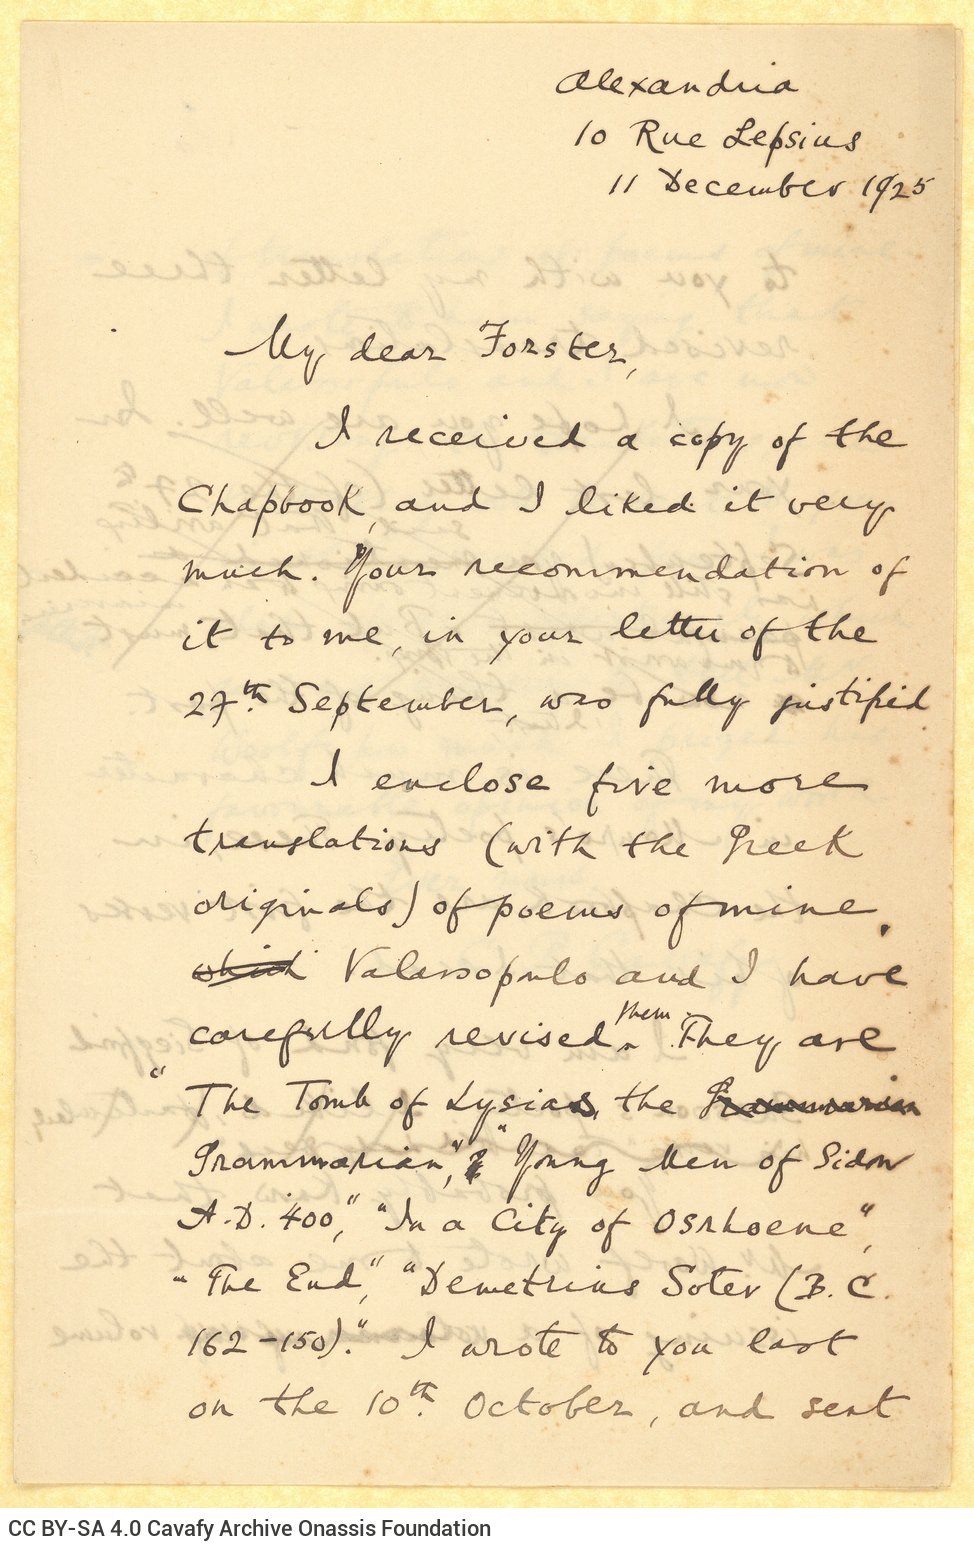 Handwritten copy of a letter by Cavafy to E. M. Forster on three pages of a bifolio. The poet expresses his admiration for th